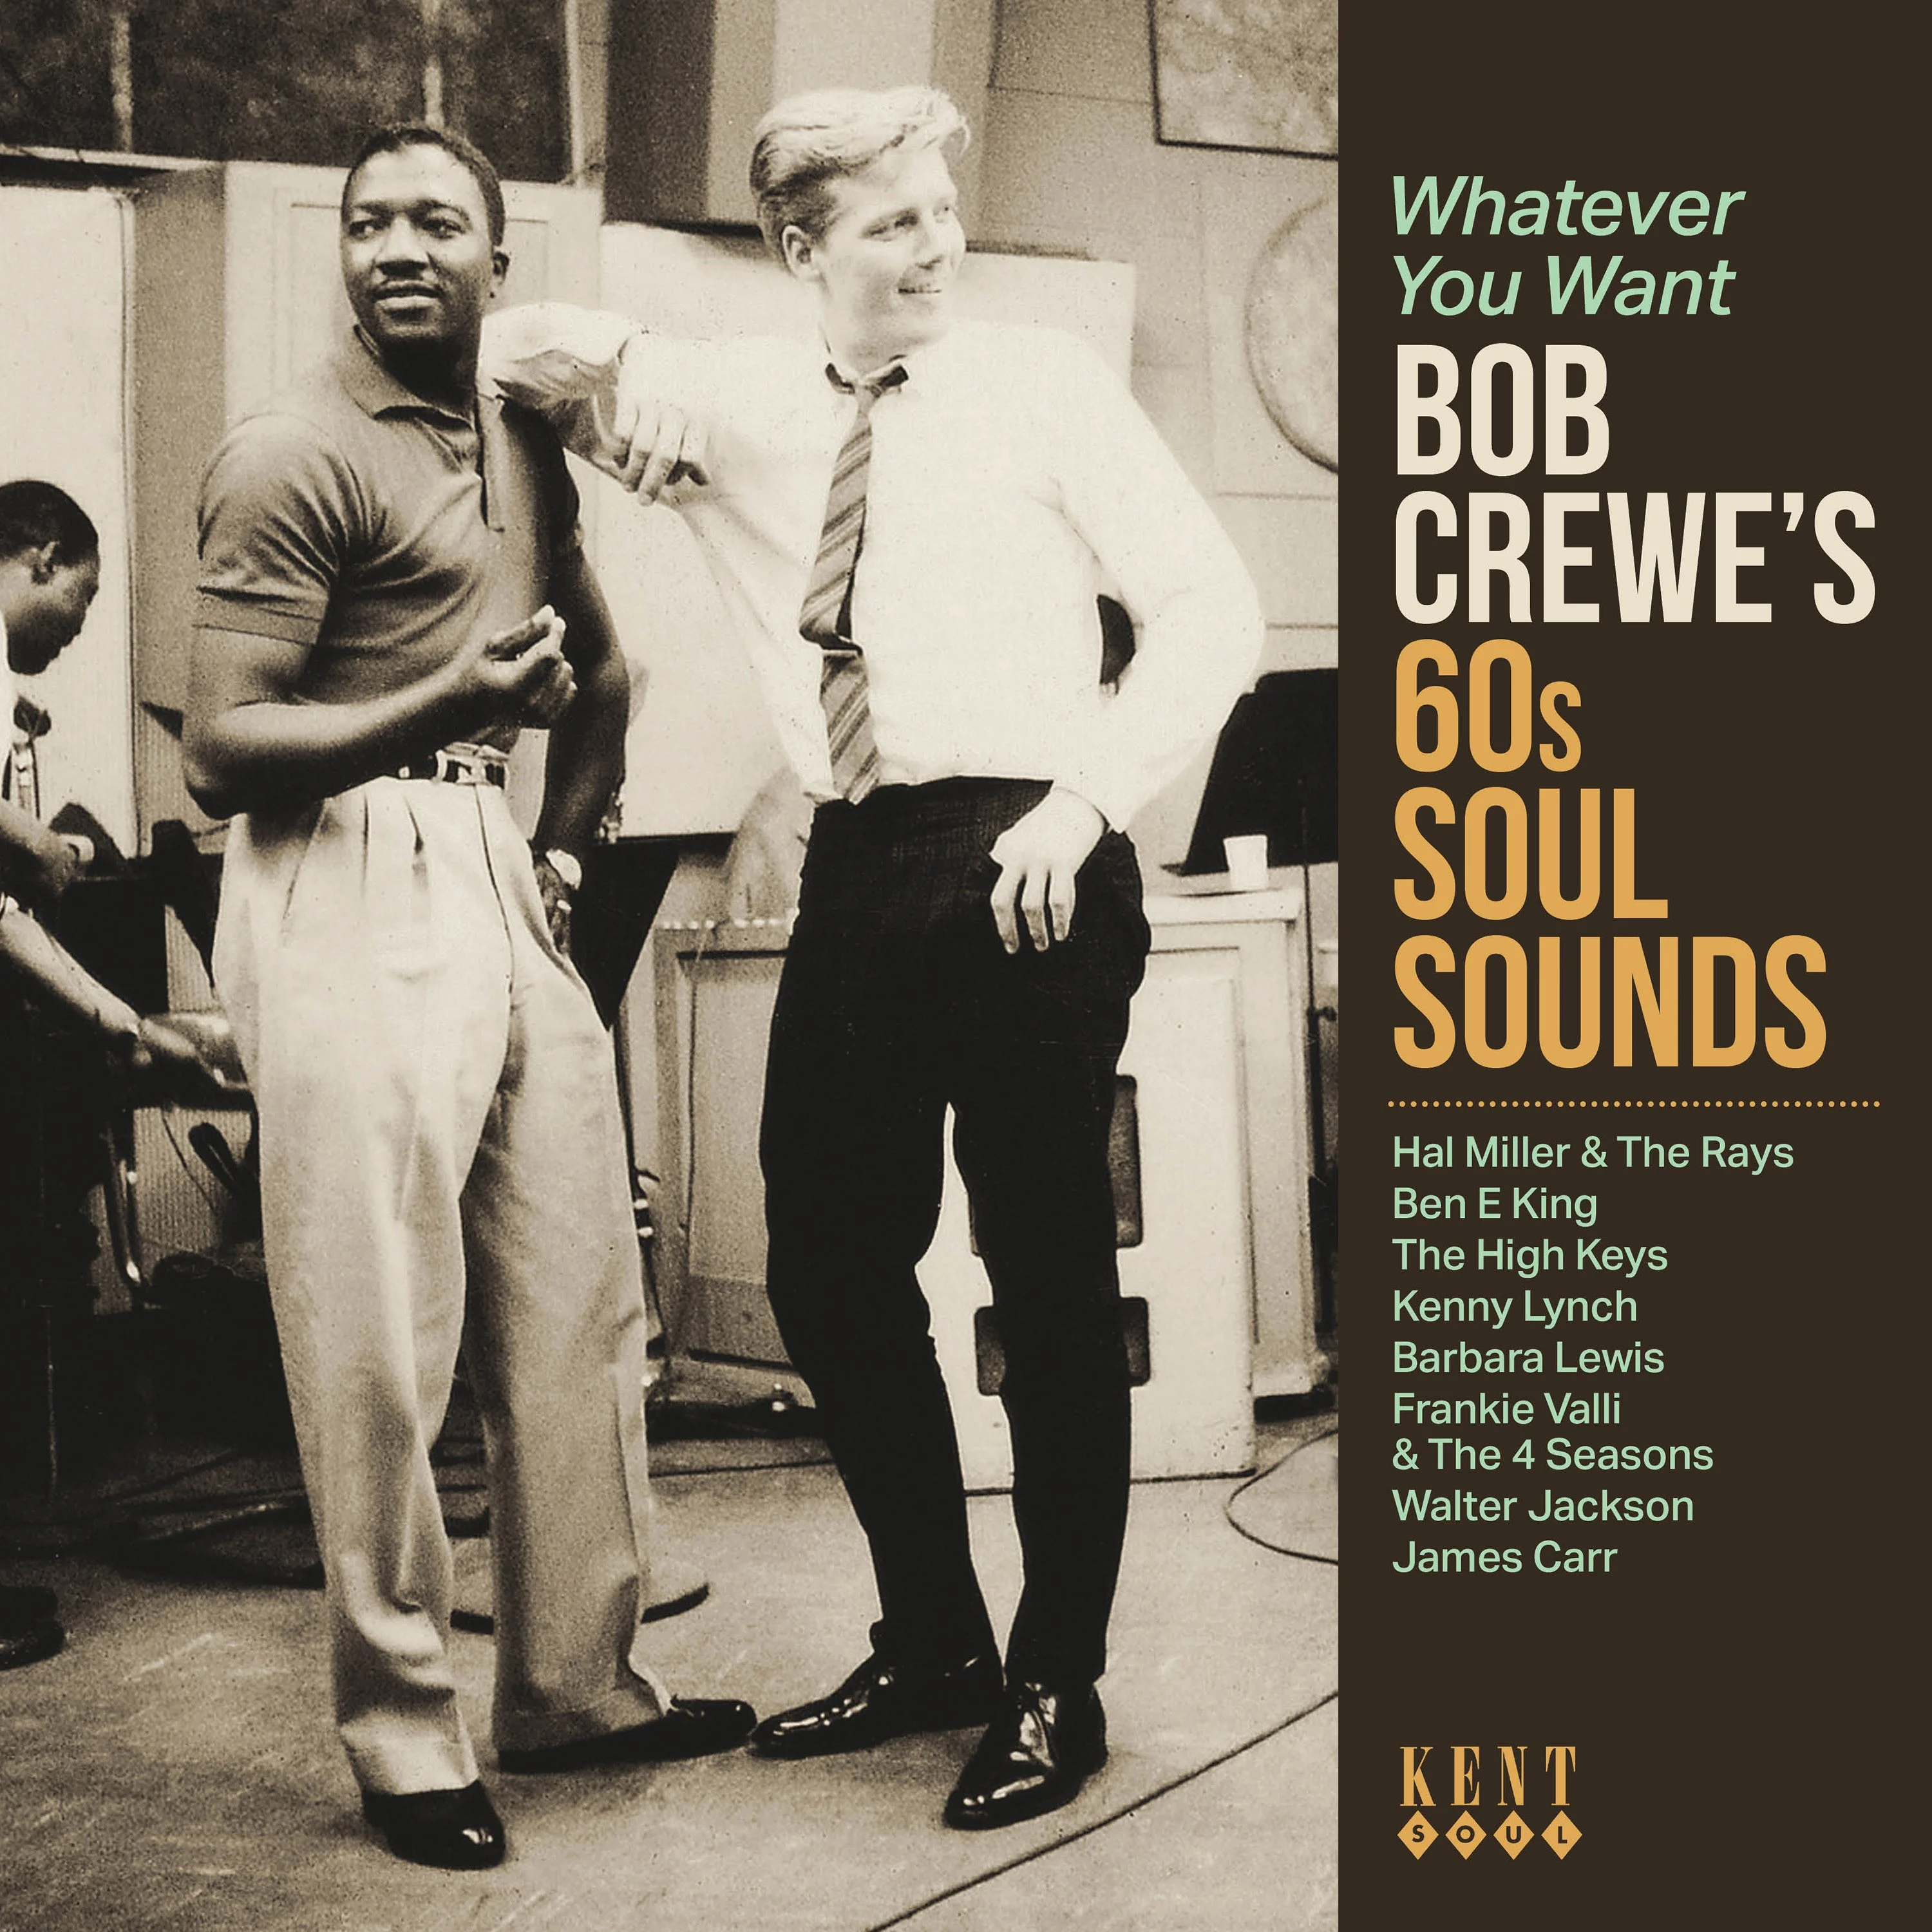 Whatever You Want - Bob Crewe's 60s Soul Sounds